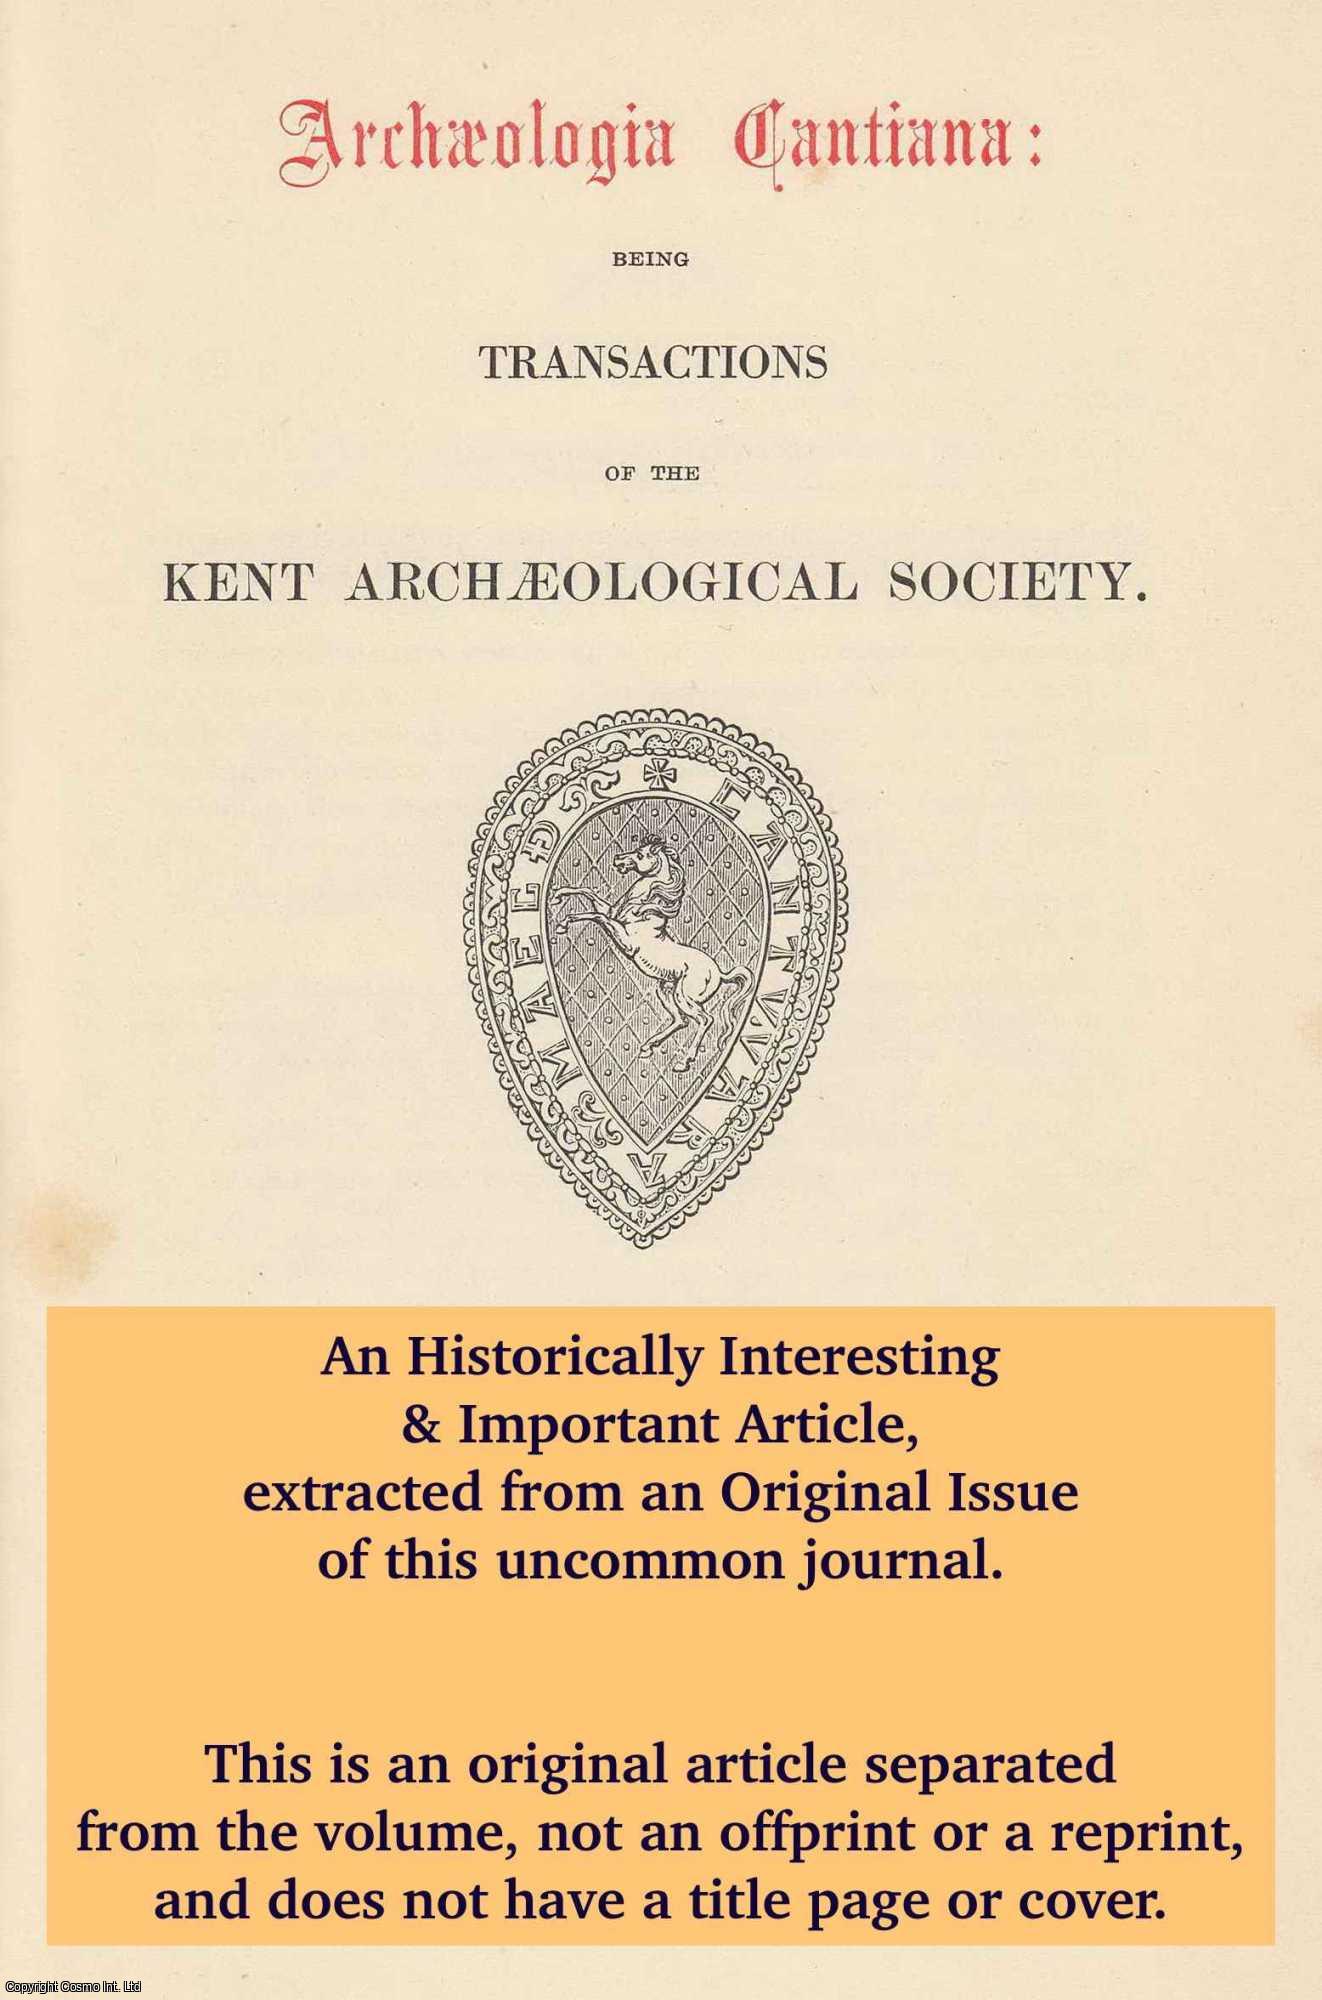 --- - Researches and Discoveries in Kent. Trial Excavation at Deanery Gate, Rochester. An original article from The Archaeologia Cantiana, 1974.